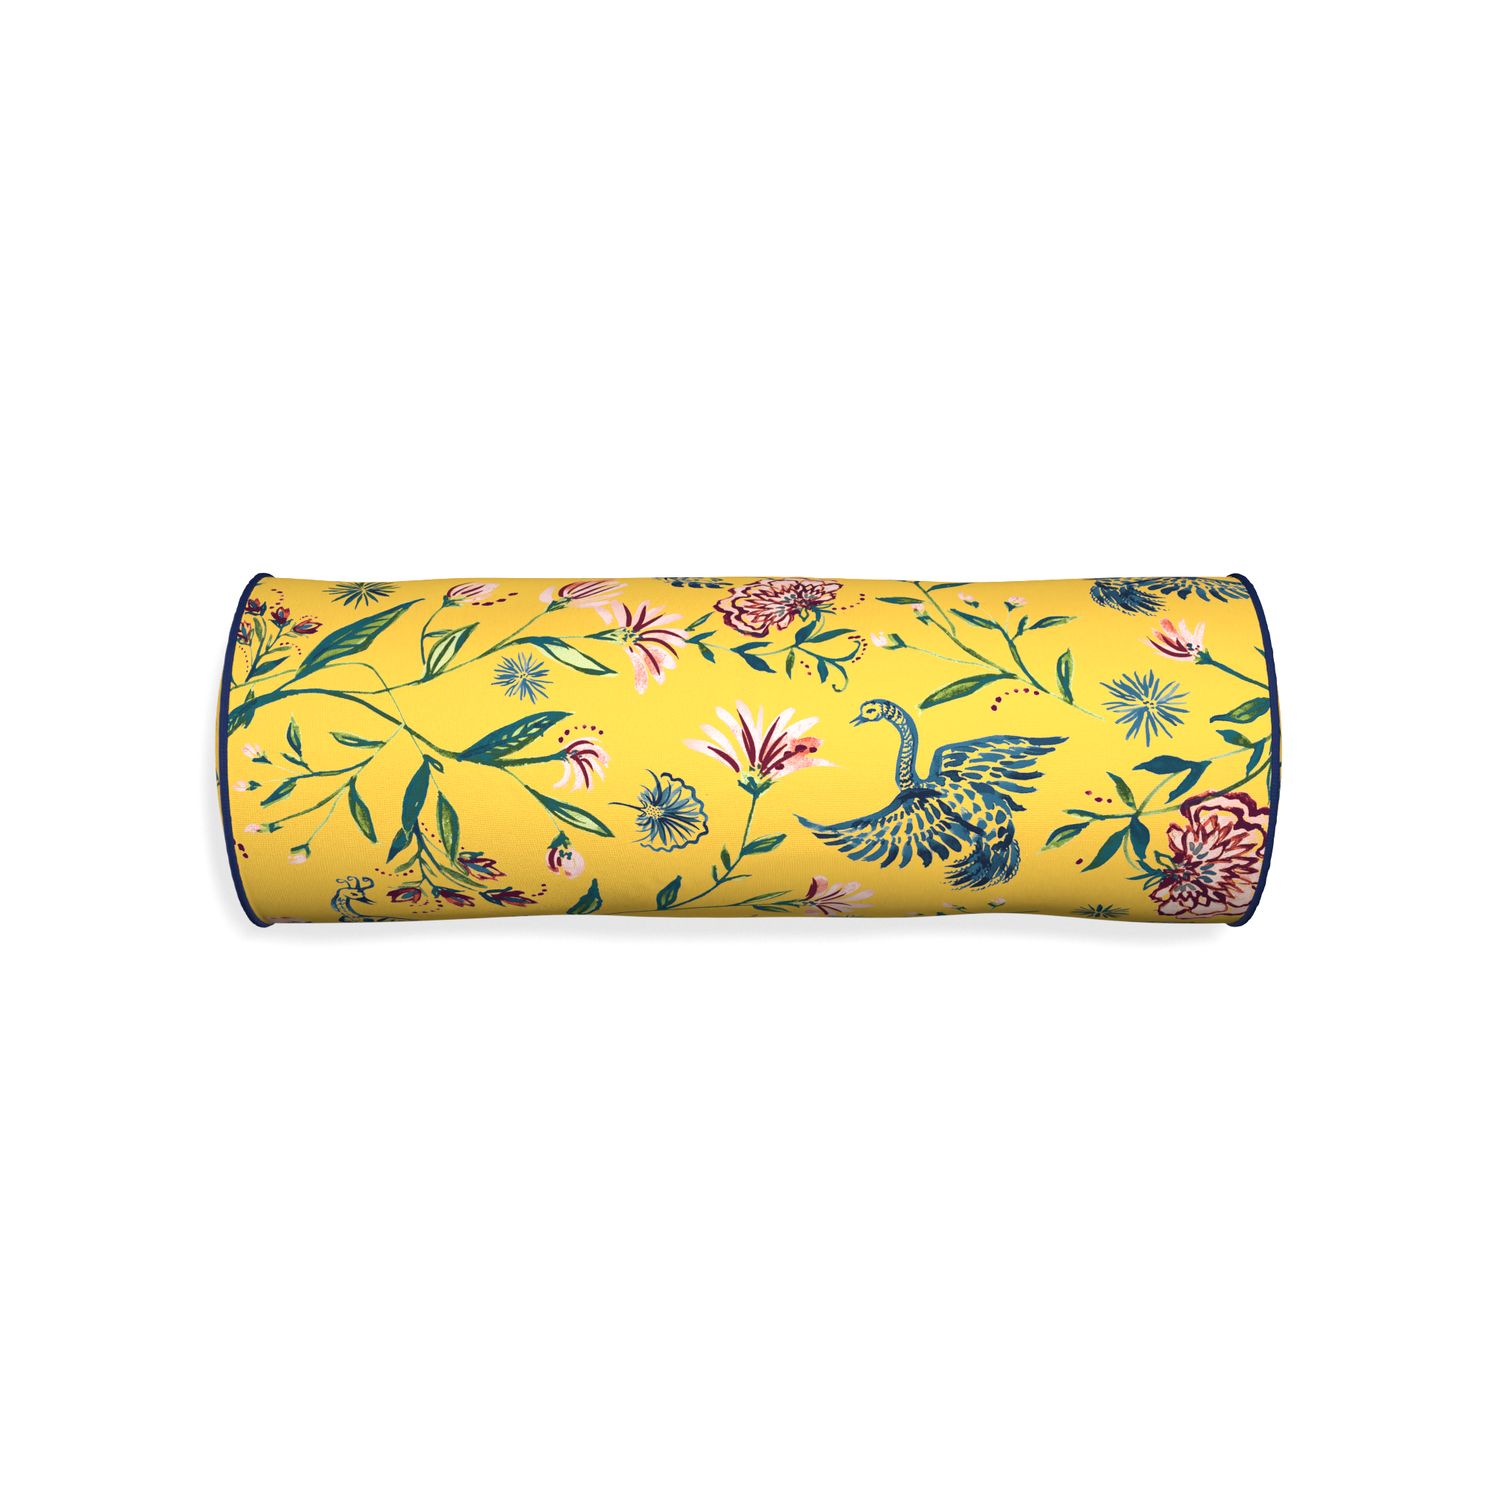 Bolster daphne canary custom yellow chinoiseriepillow with midnight piping on white background